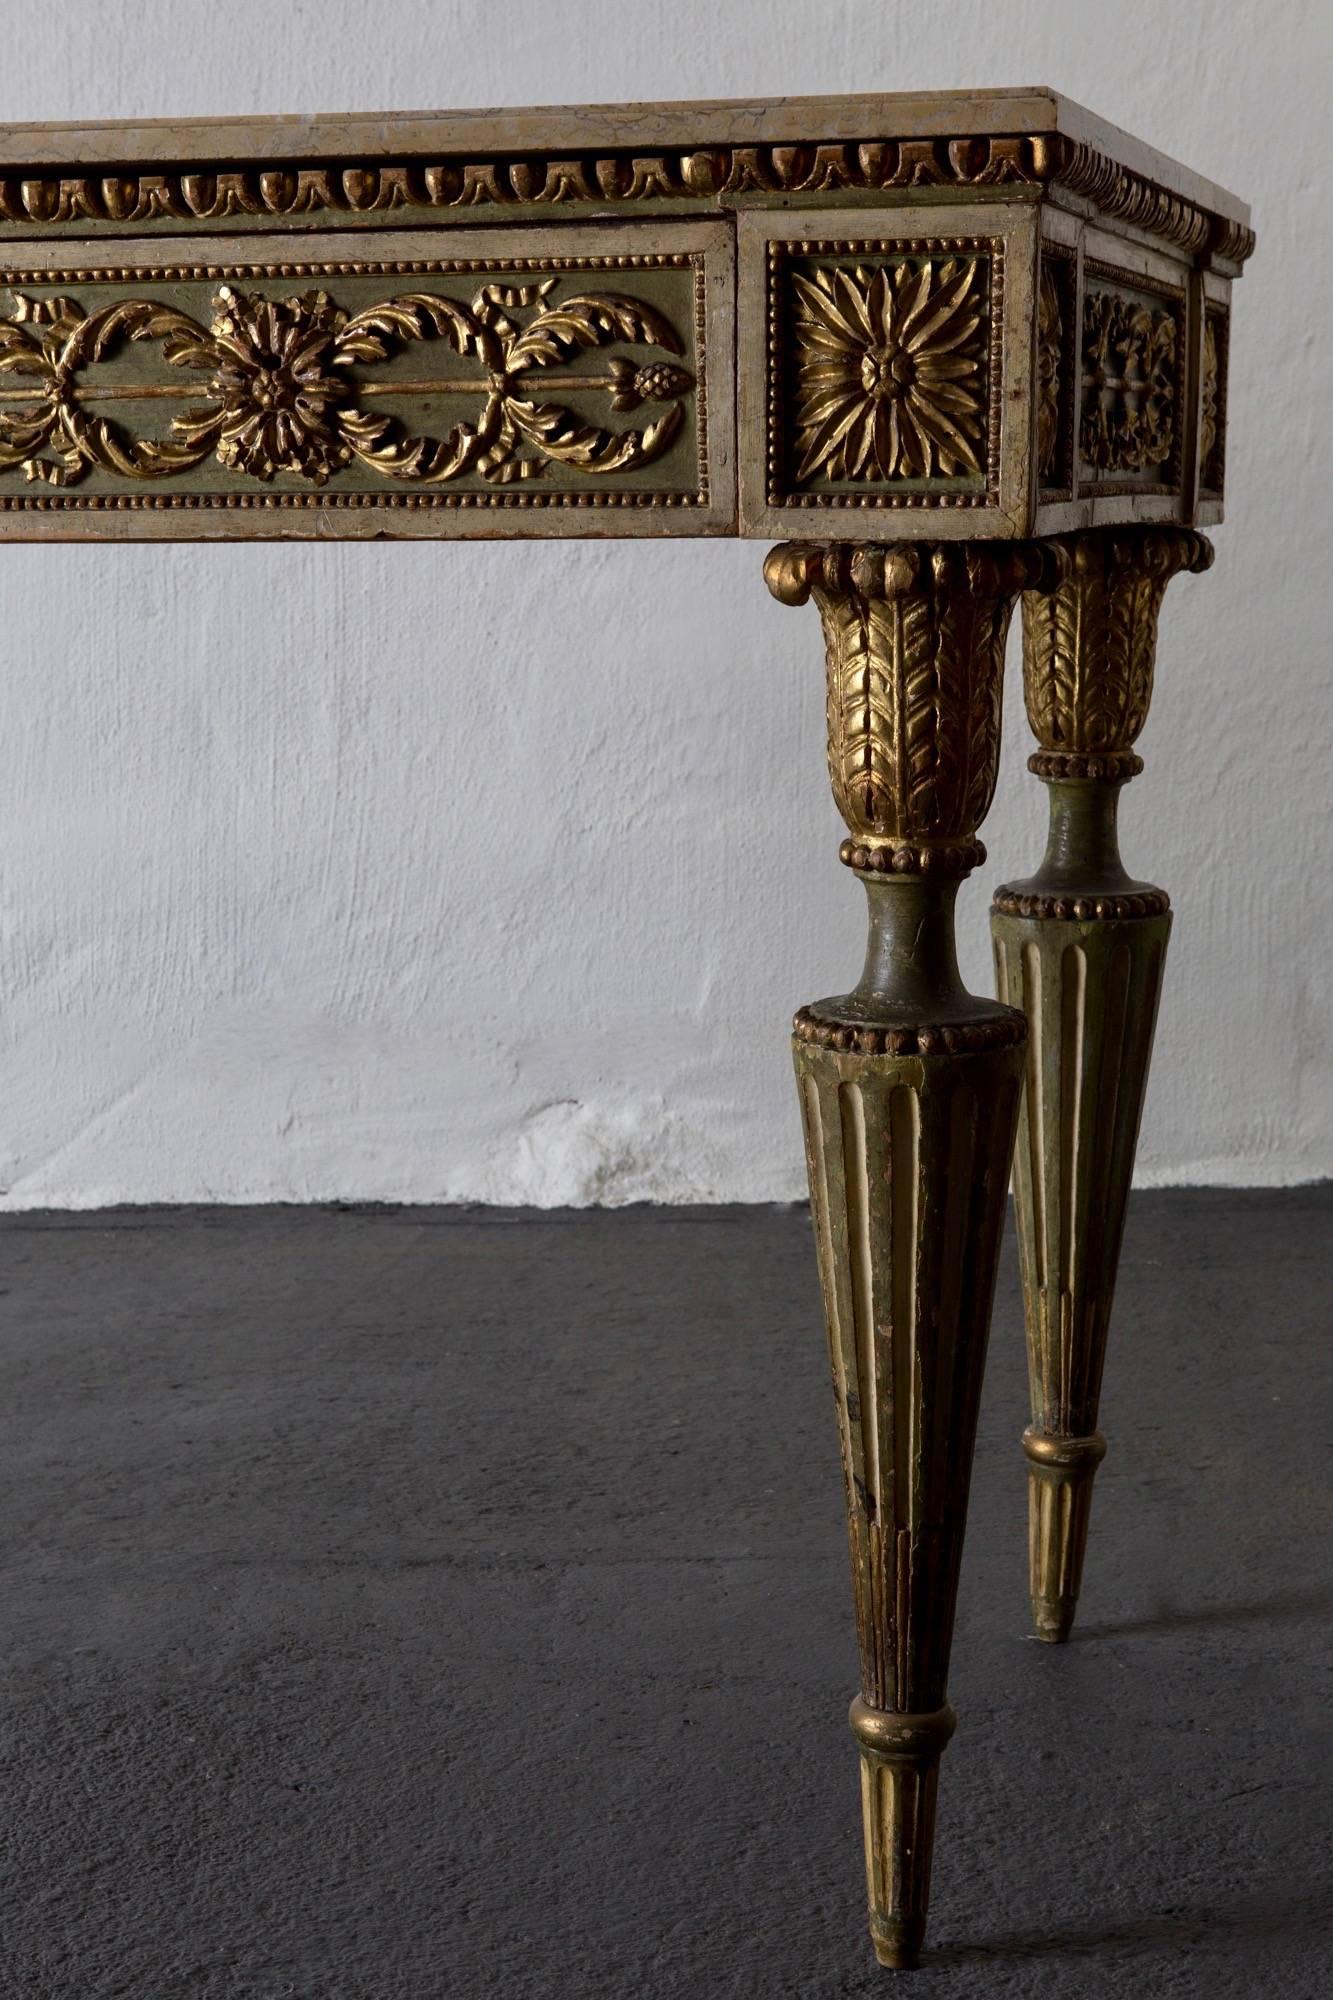 Console table Italian large polychrome paint green gilded 18th century, Italy. A large console table made during the 18th century in Italy. Polychromed painted in a dusty green with gilded details. Marble top. Drawer in frieze. Decorated with